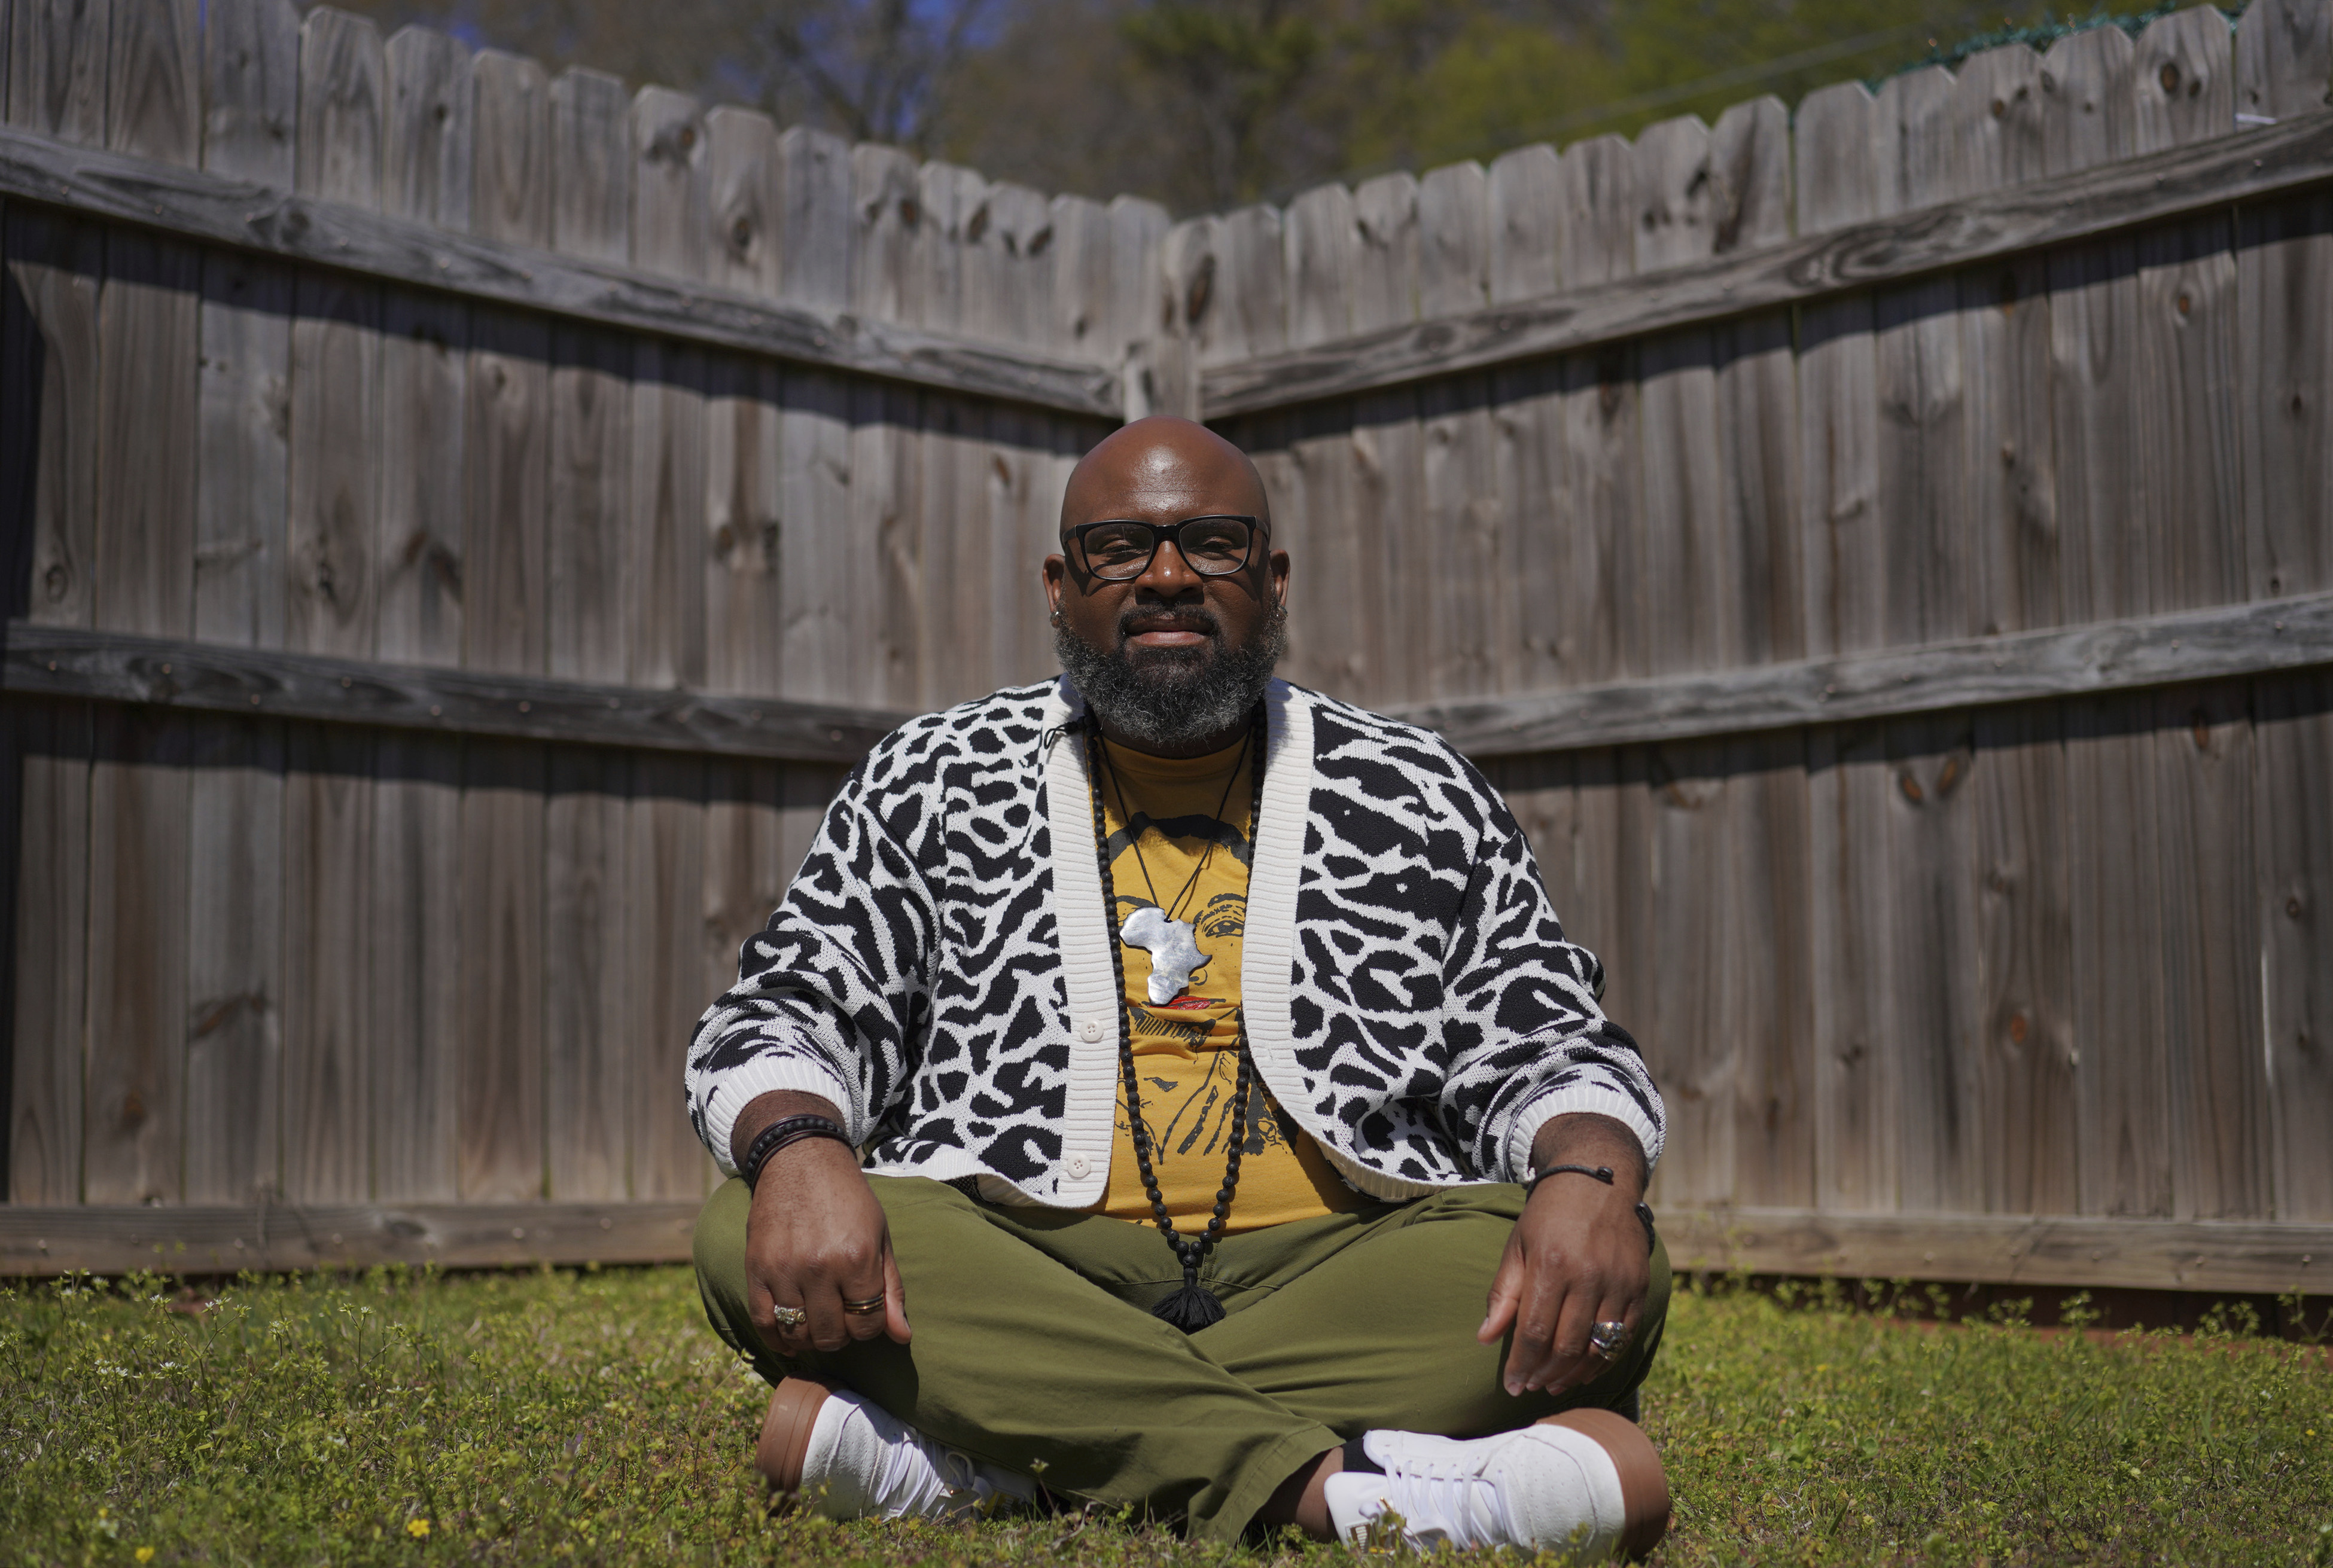 lama rod describes himself as a black buddhist southern queen. he wants to free you from suffering.